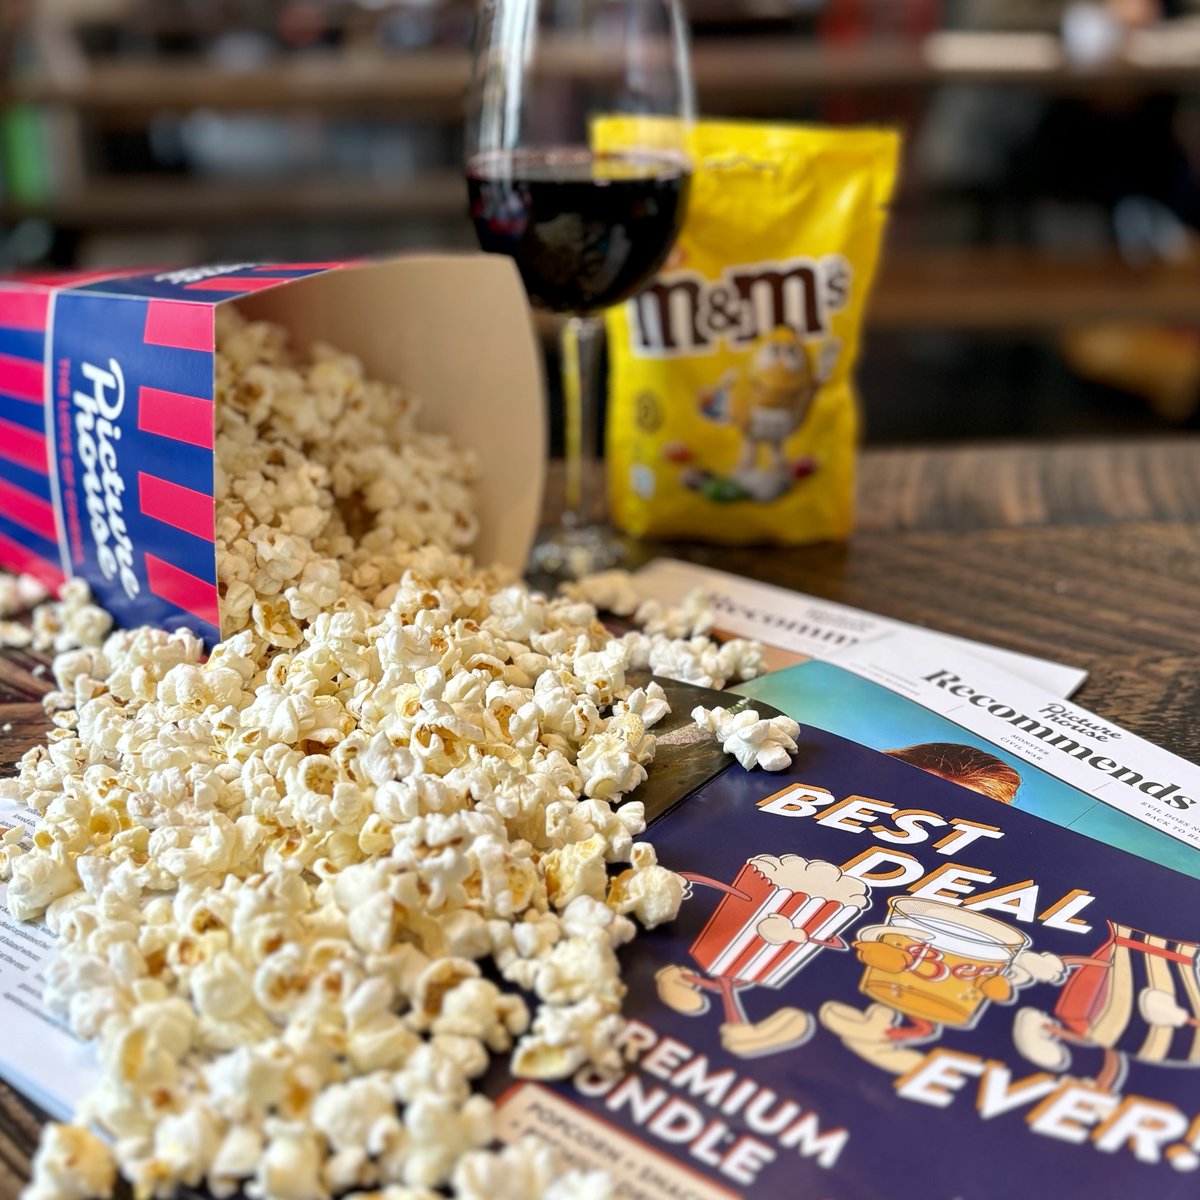 Life is full of choice, and here are yours: 🍿 Sweet, Salter of Mixed? 🍬 M&Ms, Minstrels or Mixed Candy? 🍷Red, White or a pint of Camden Hells? Take advantage of our delicious deal on your next visit 😋 #hackney #lovehackney #hackeylife #hackneyfoodies #cinemasnacks #popcorn